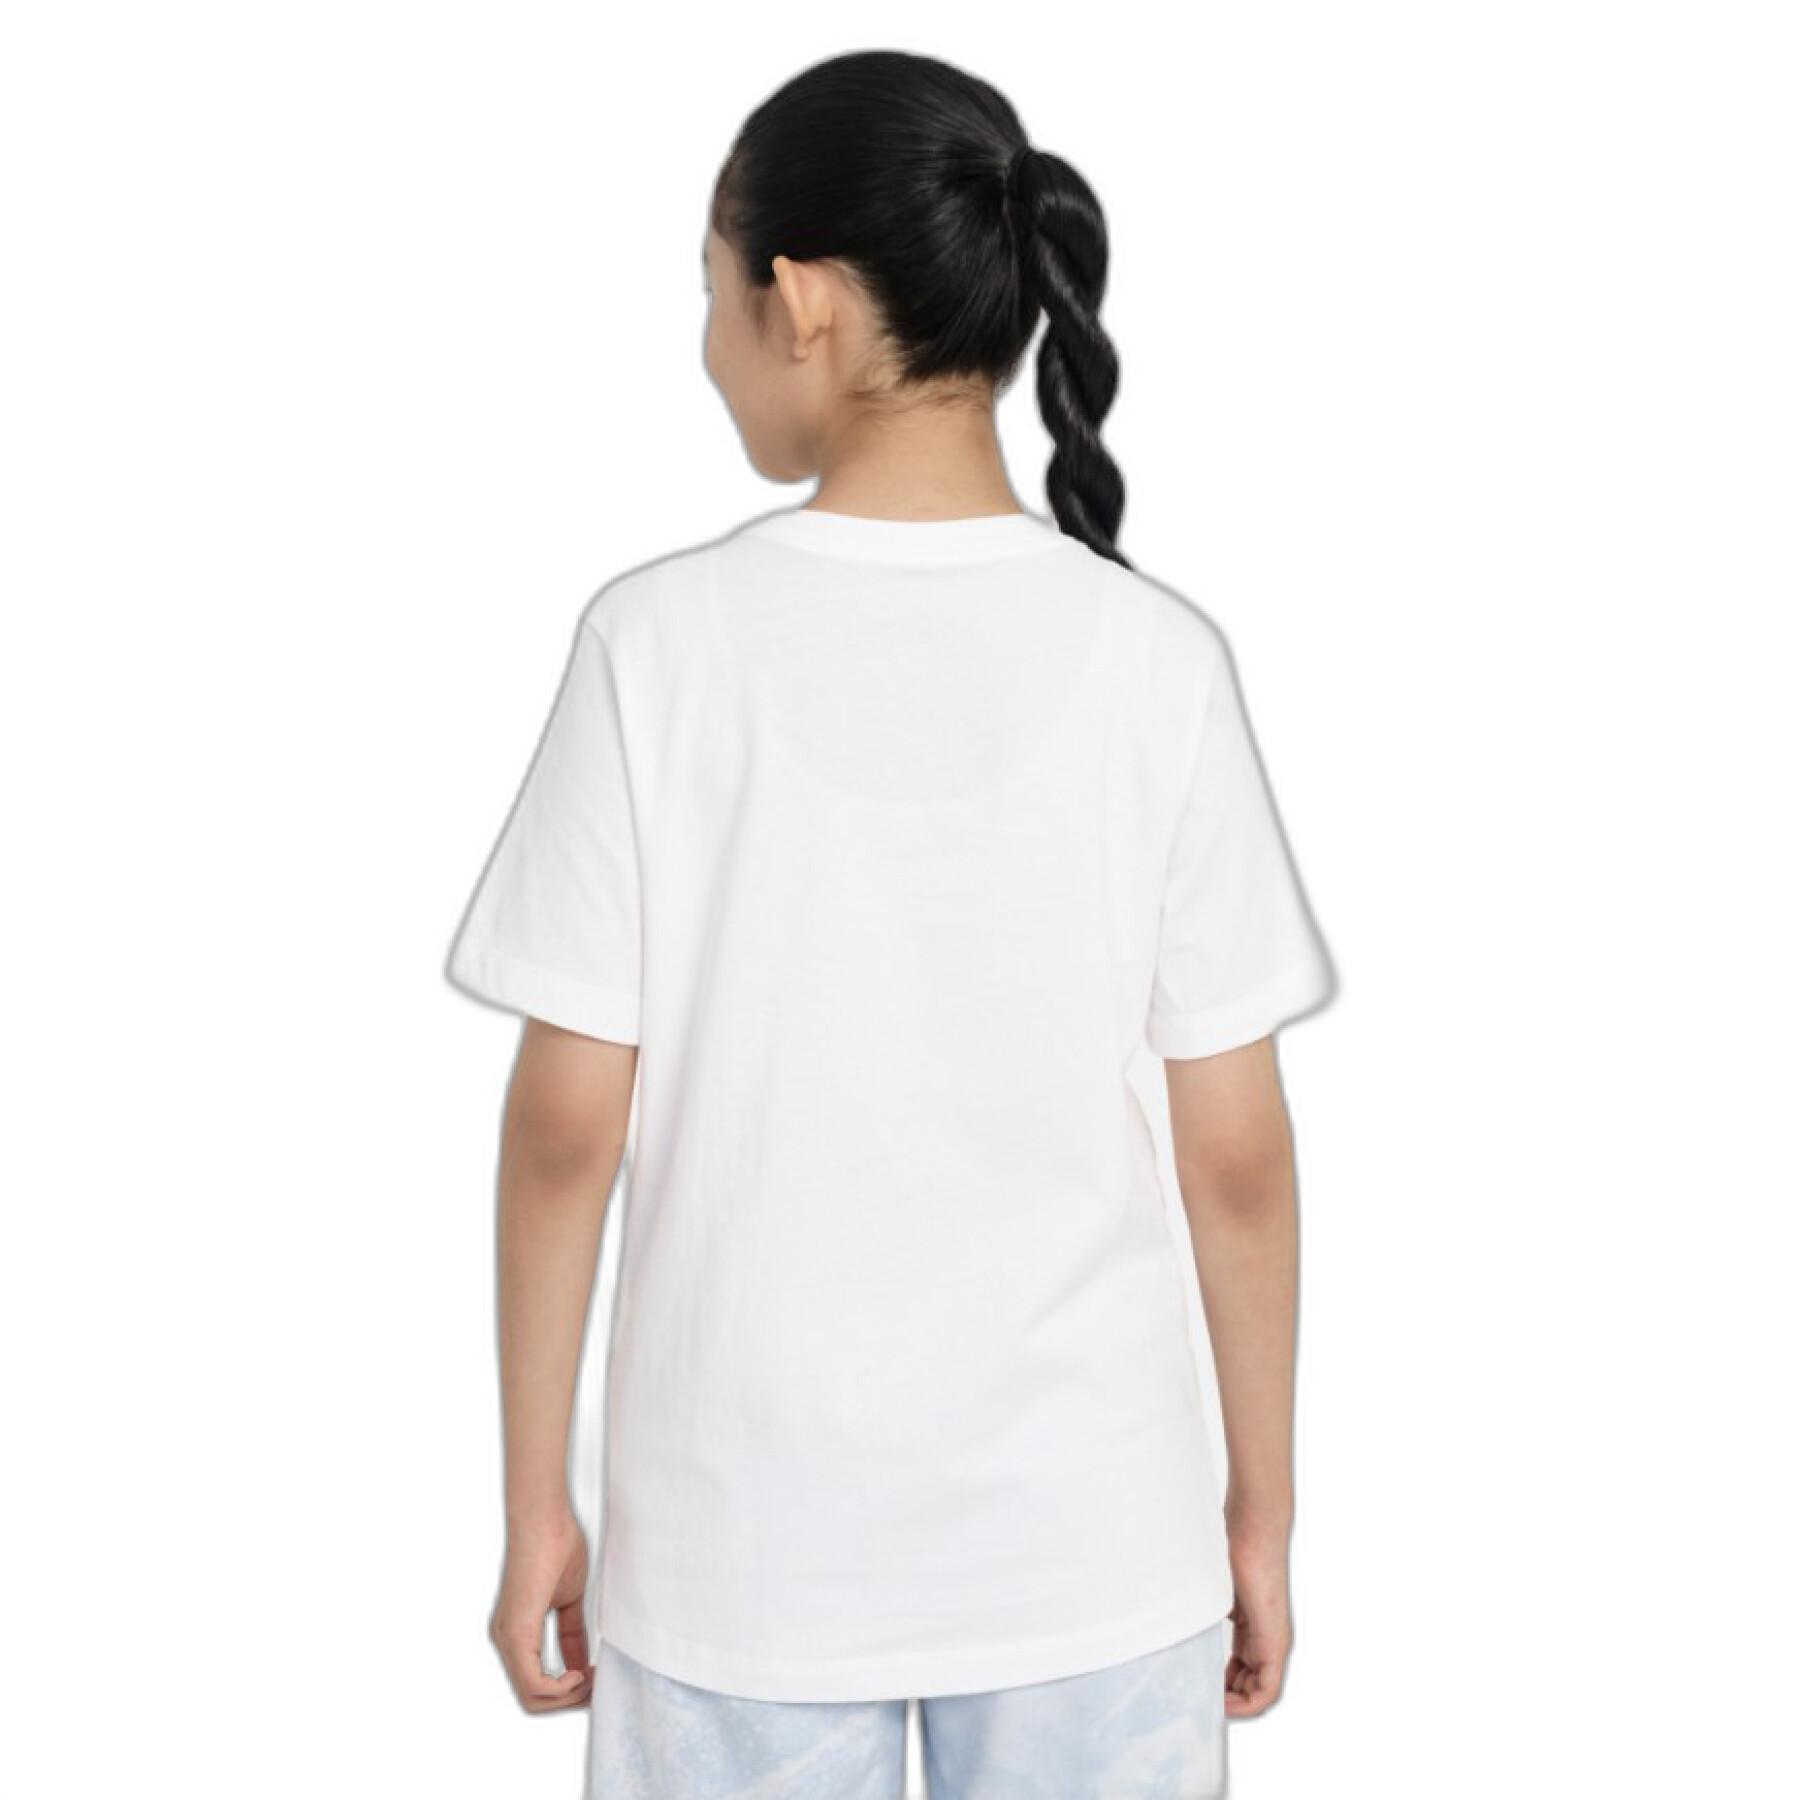 Kinder T-Shirt Nike By You